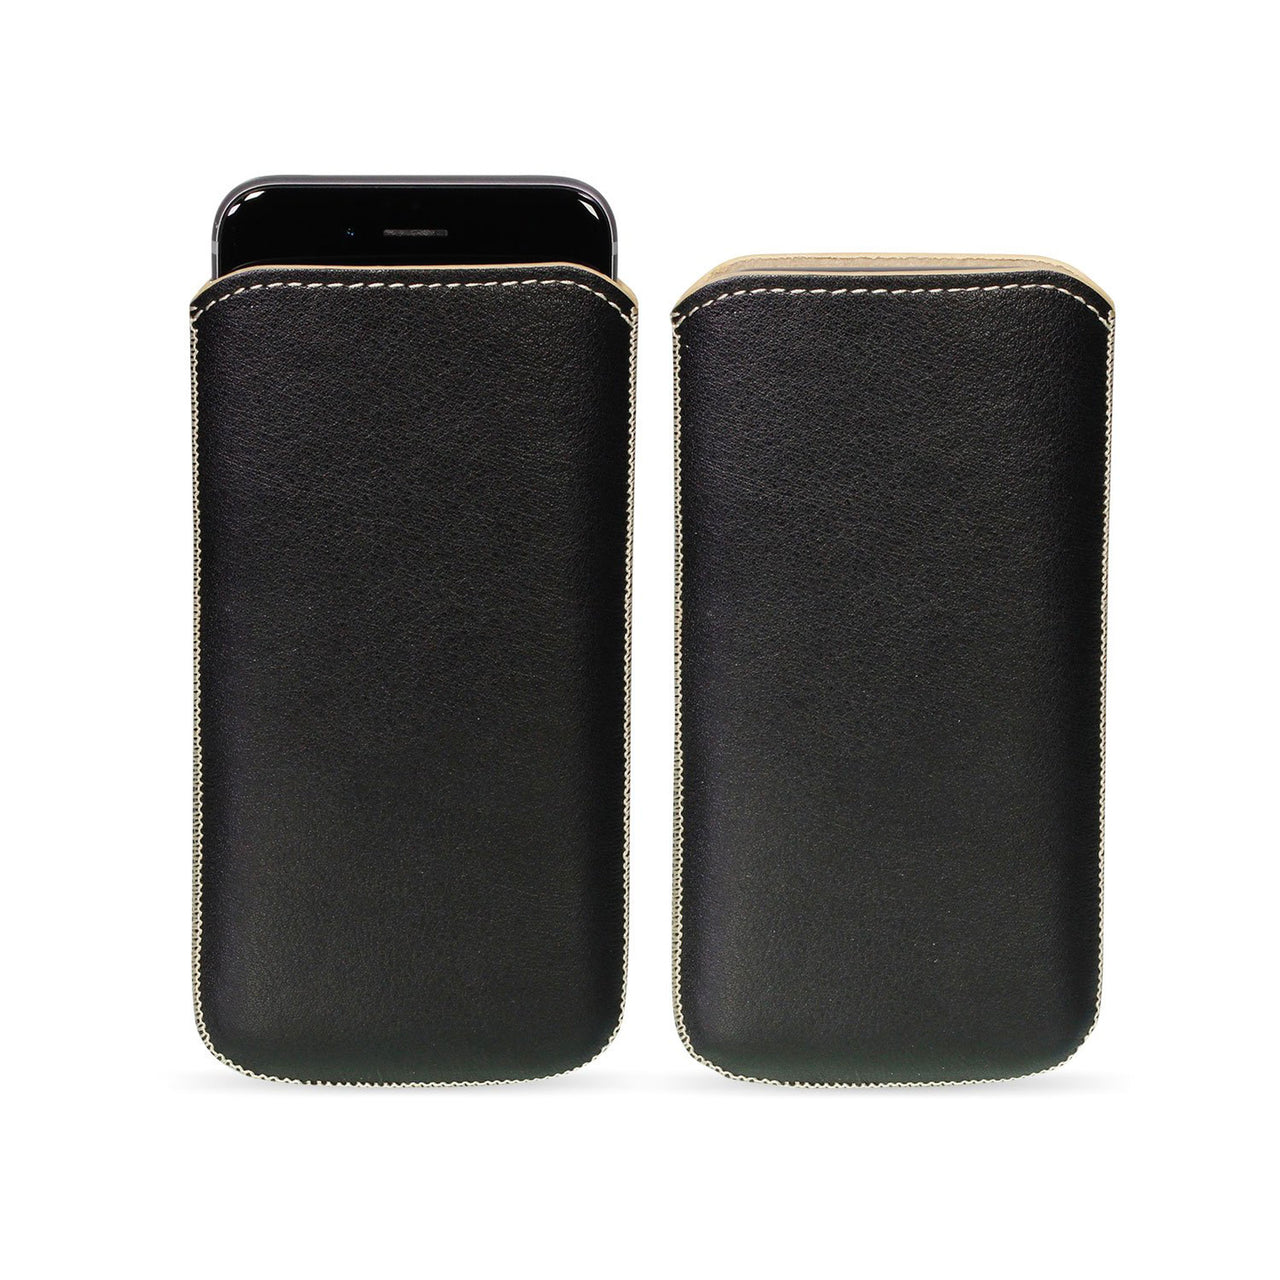 iPhone 12 Mini Genuine Leather Pouch Sleeve Case | Artisanpouch